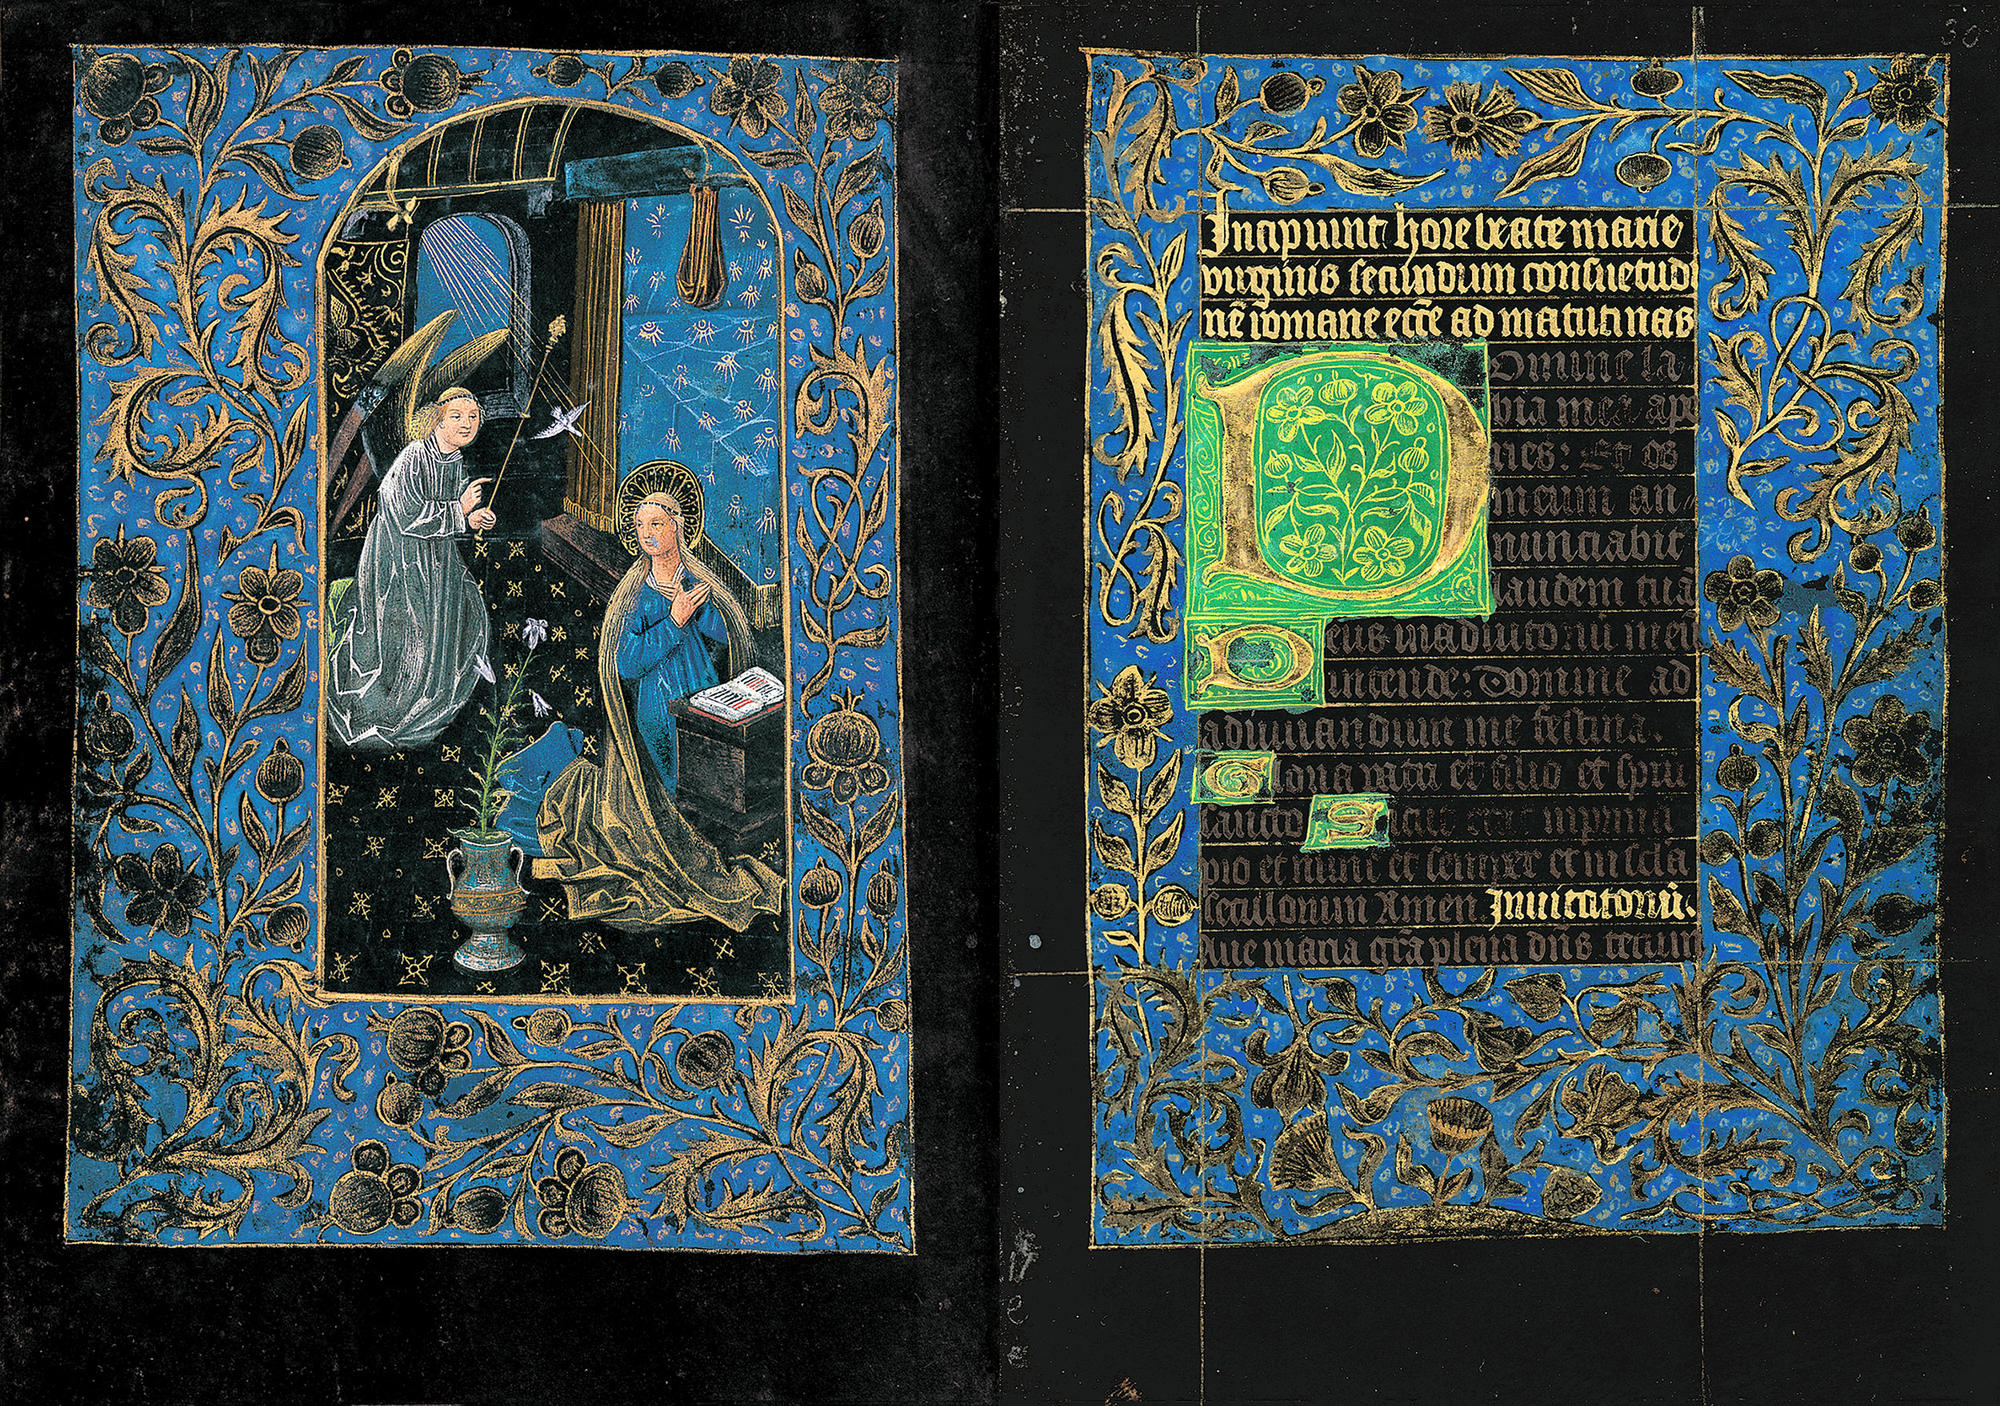 Pierpont Morgan Library, MS M.493 (Black Book of Hours), Annunciation,  fols. 29v–30r, Bruges, ca. 1480, 170 x 122 mm.